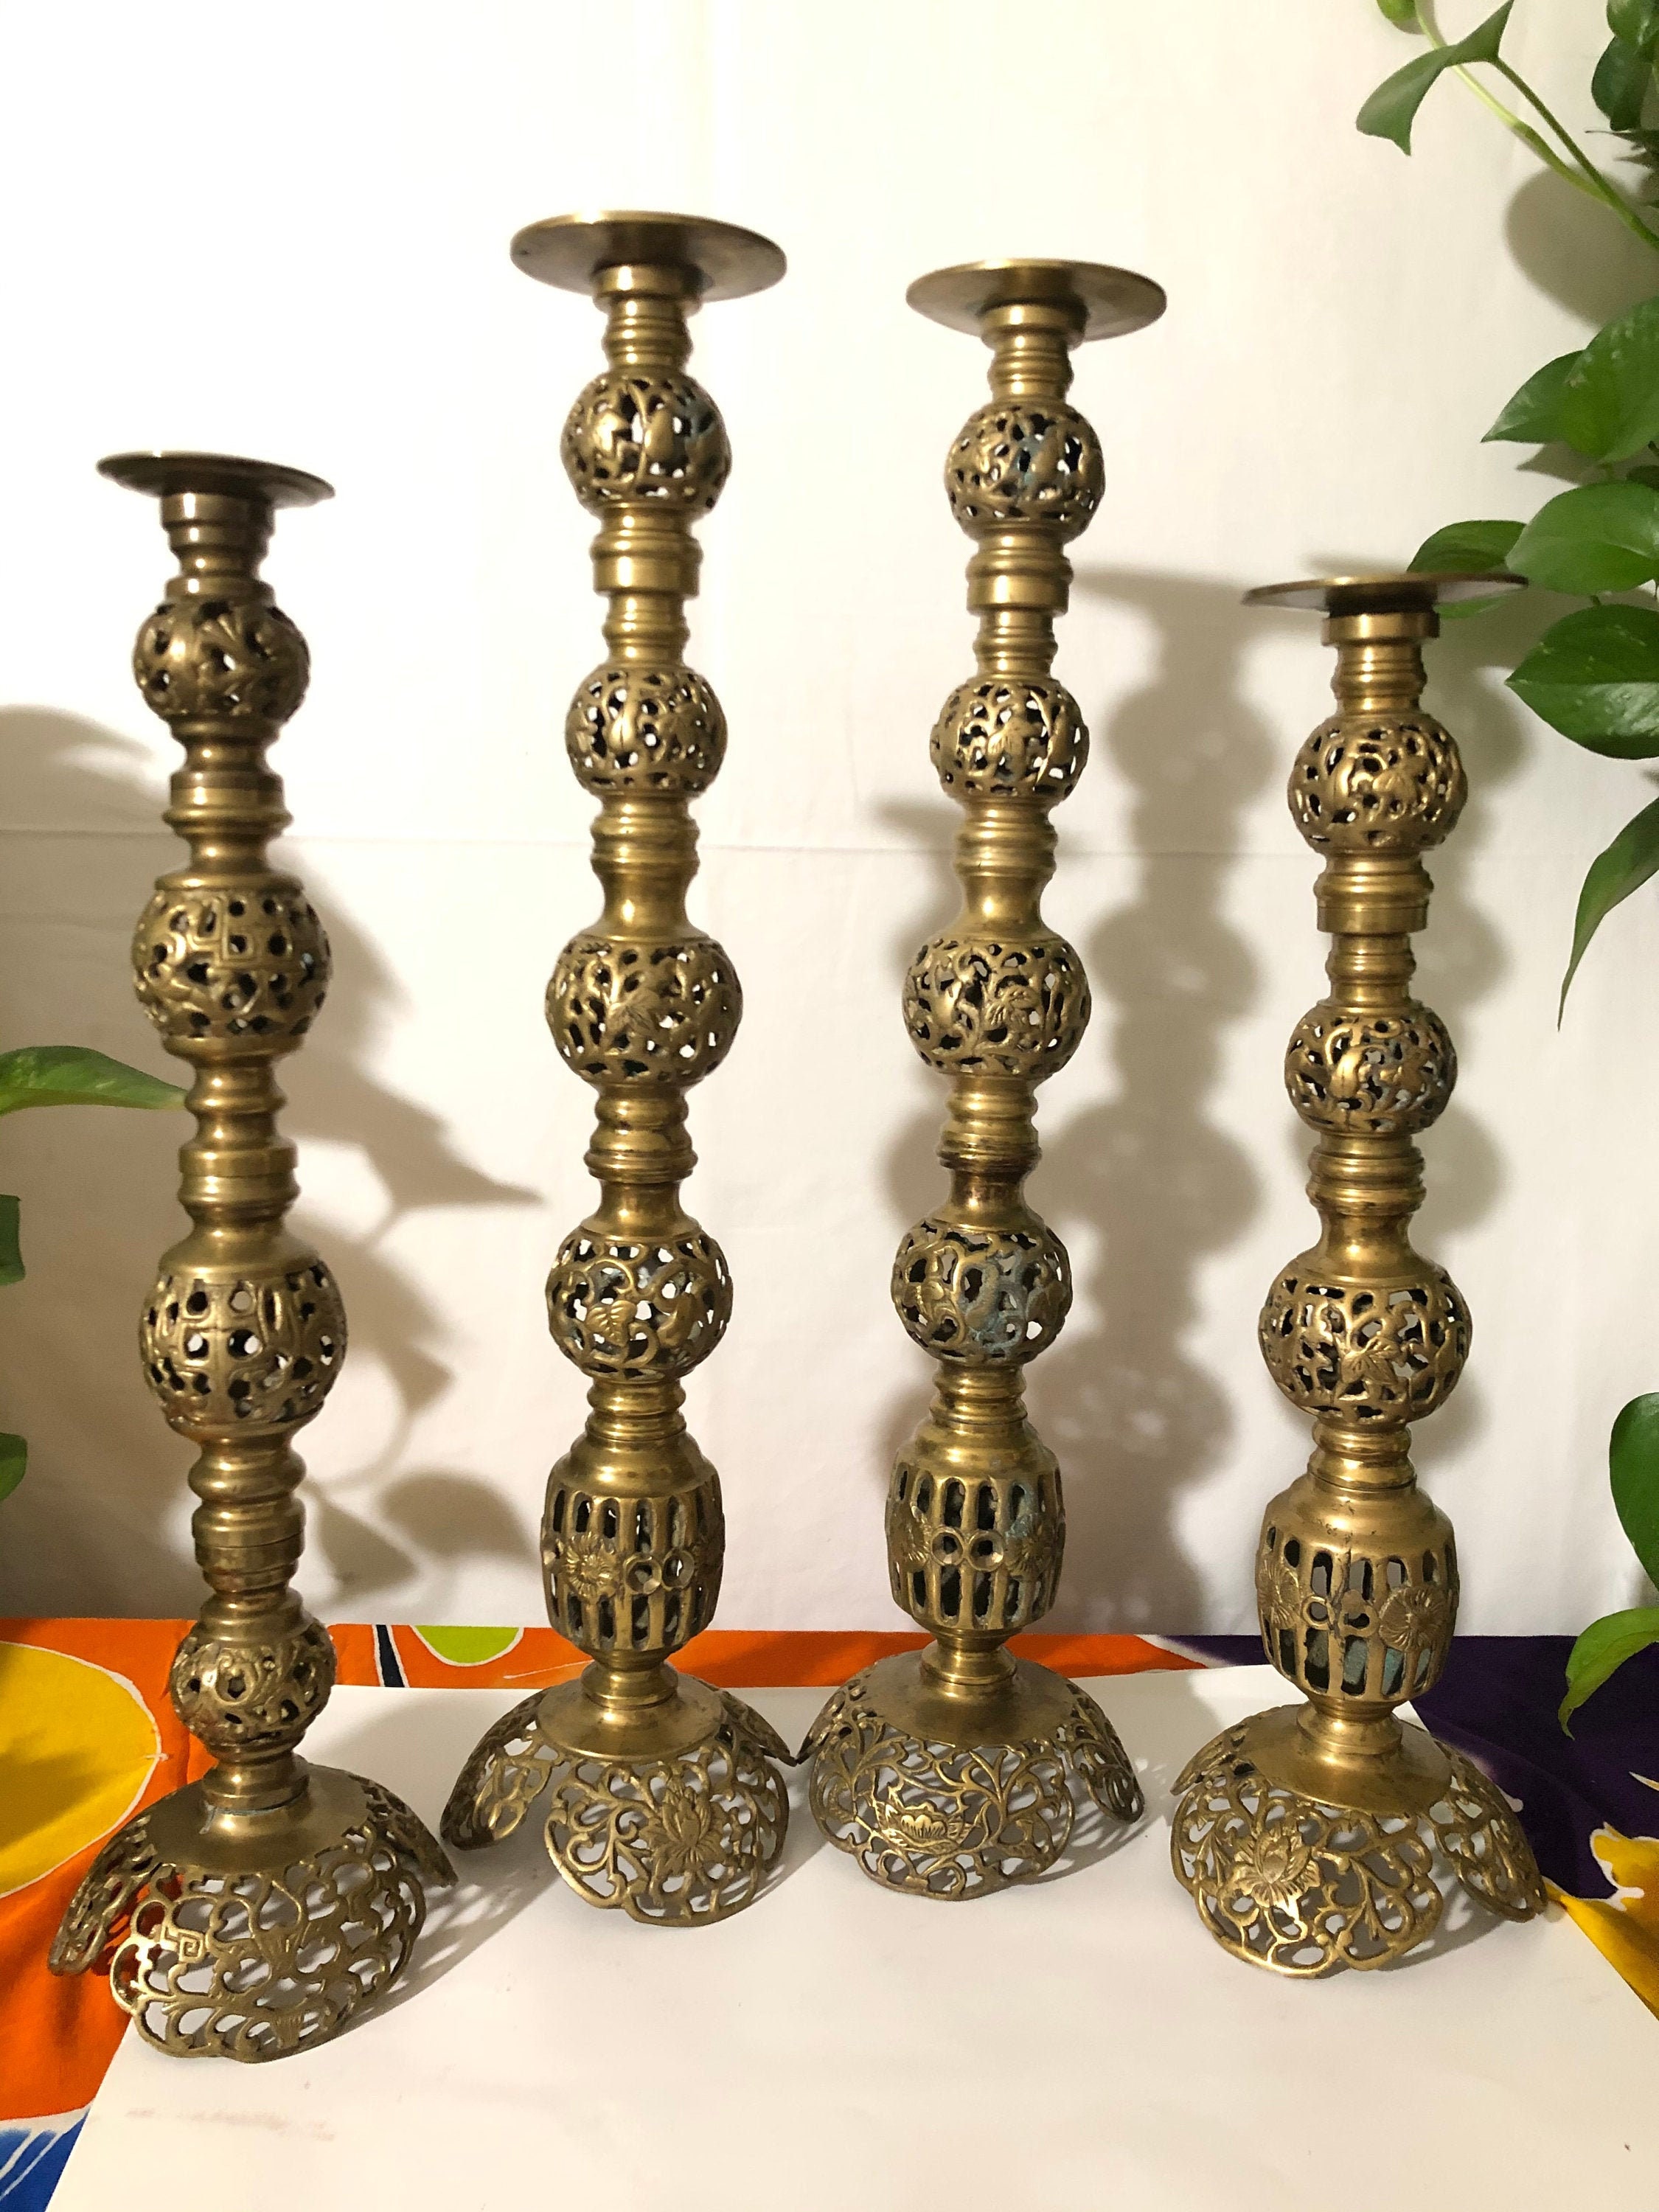 Vintage Brass Candle Holder. 2 Sizes: 20.5 and 17.5 Tall. 